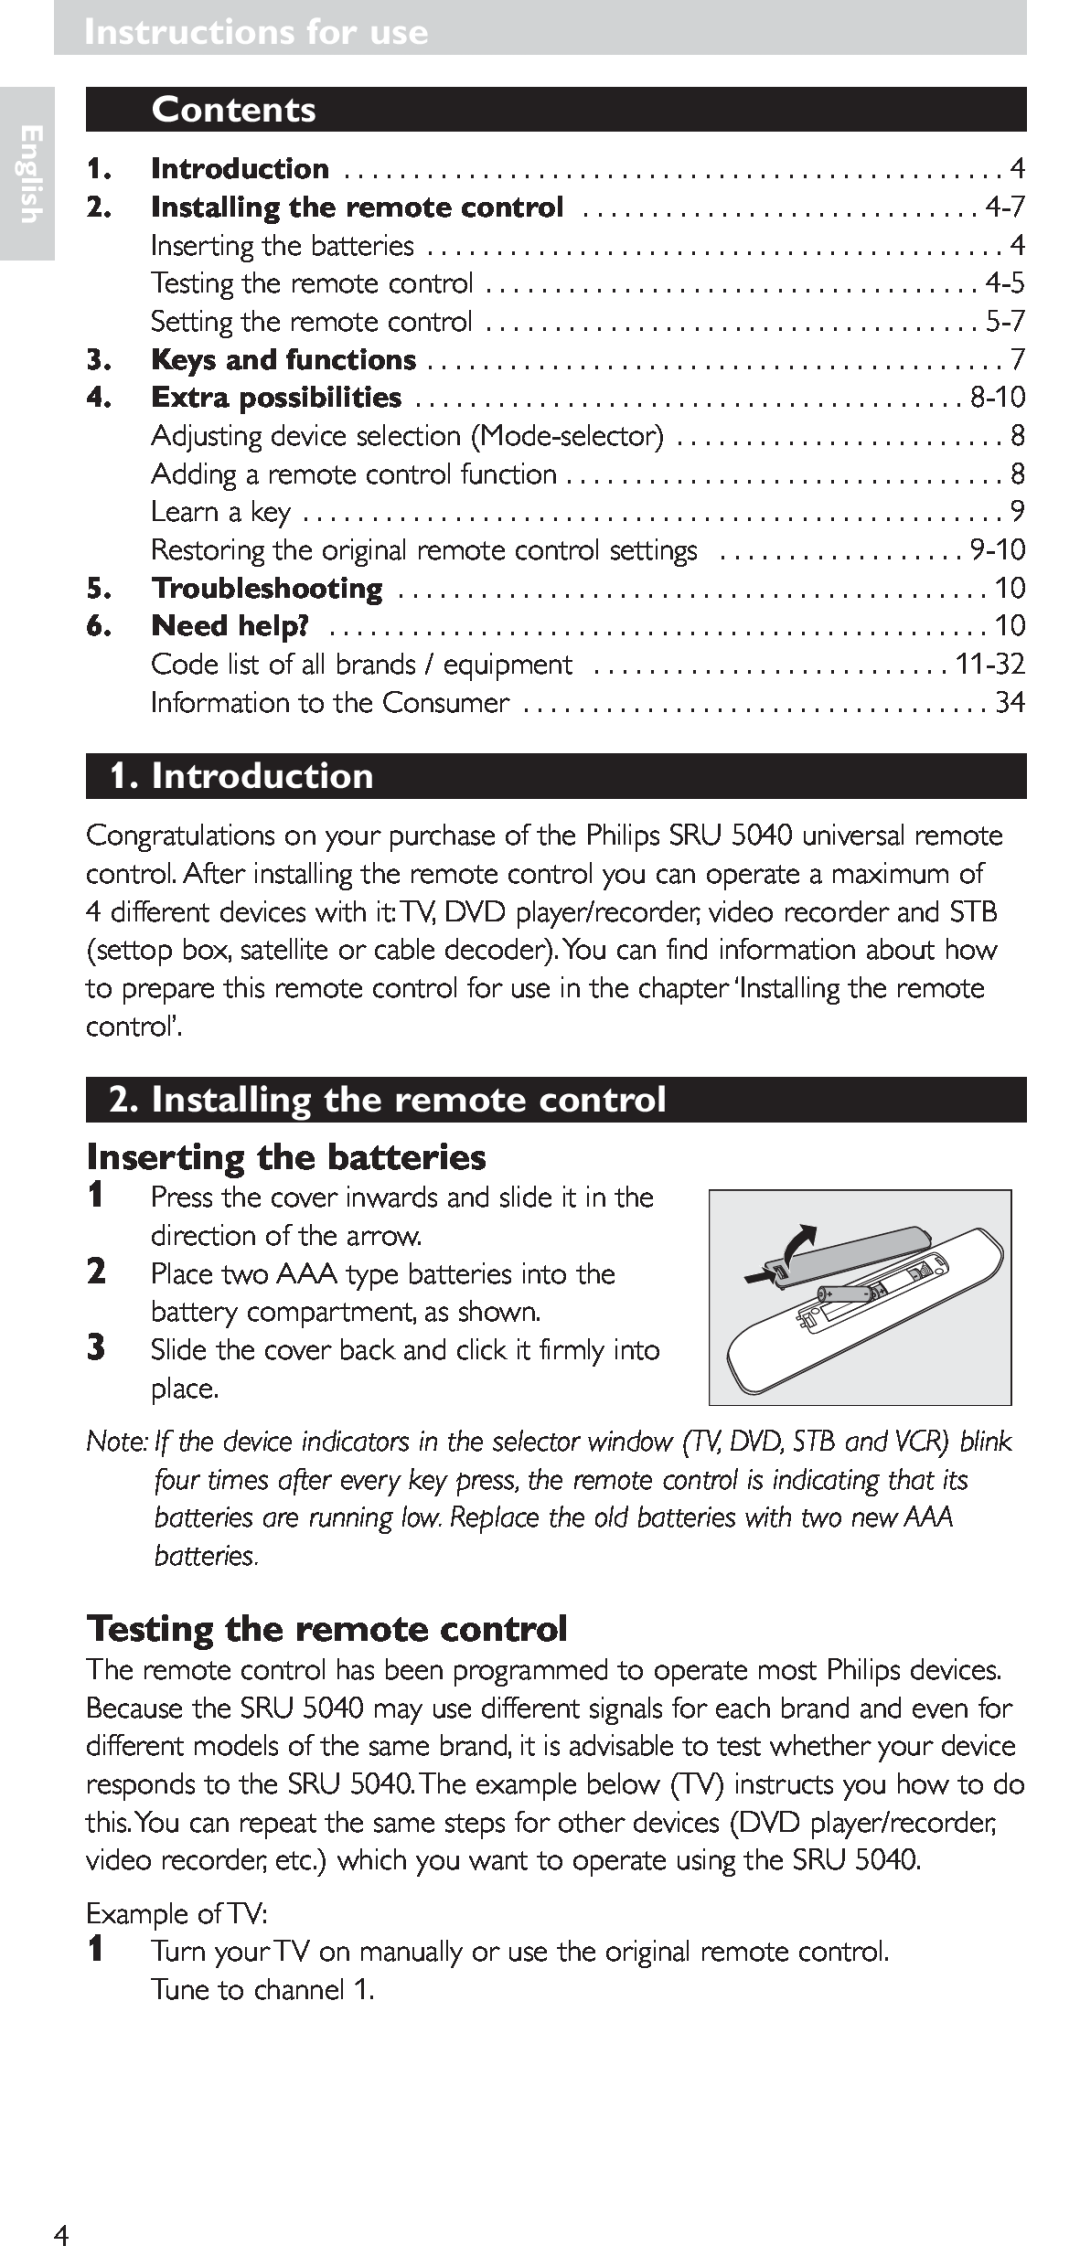 Hitachi SRU 5040/05 Instructions for use, Contents, Introduction, Installing the remote control, Inserting the batteries 